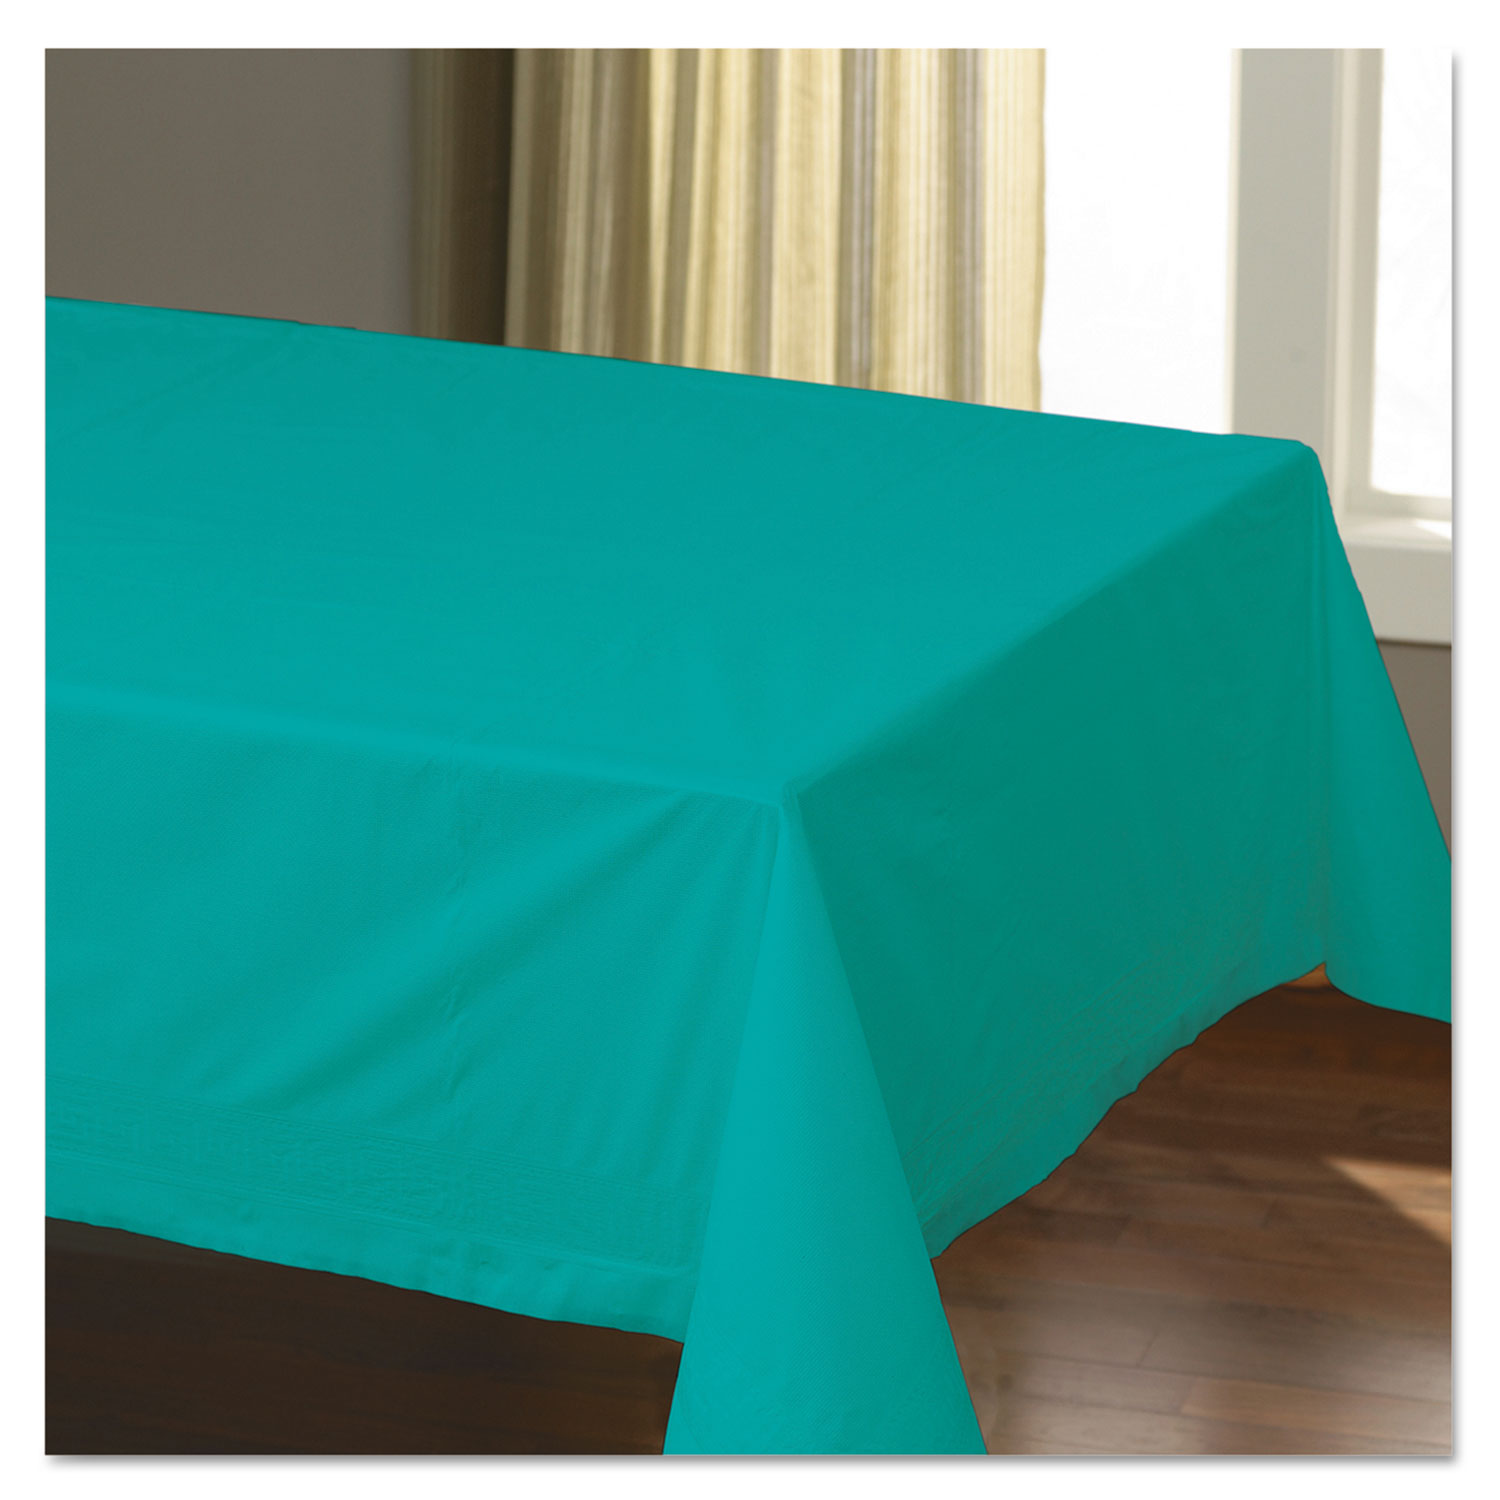  Hoffmaster 220601 Cellutex Table Covers, Tissue/Polylined, 54 x 108, Teal, 25/Carton (HFM220601) 